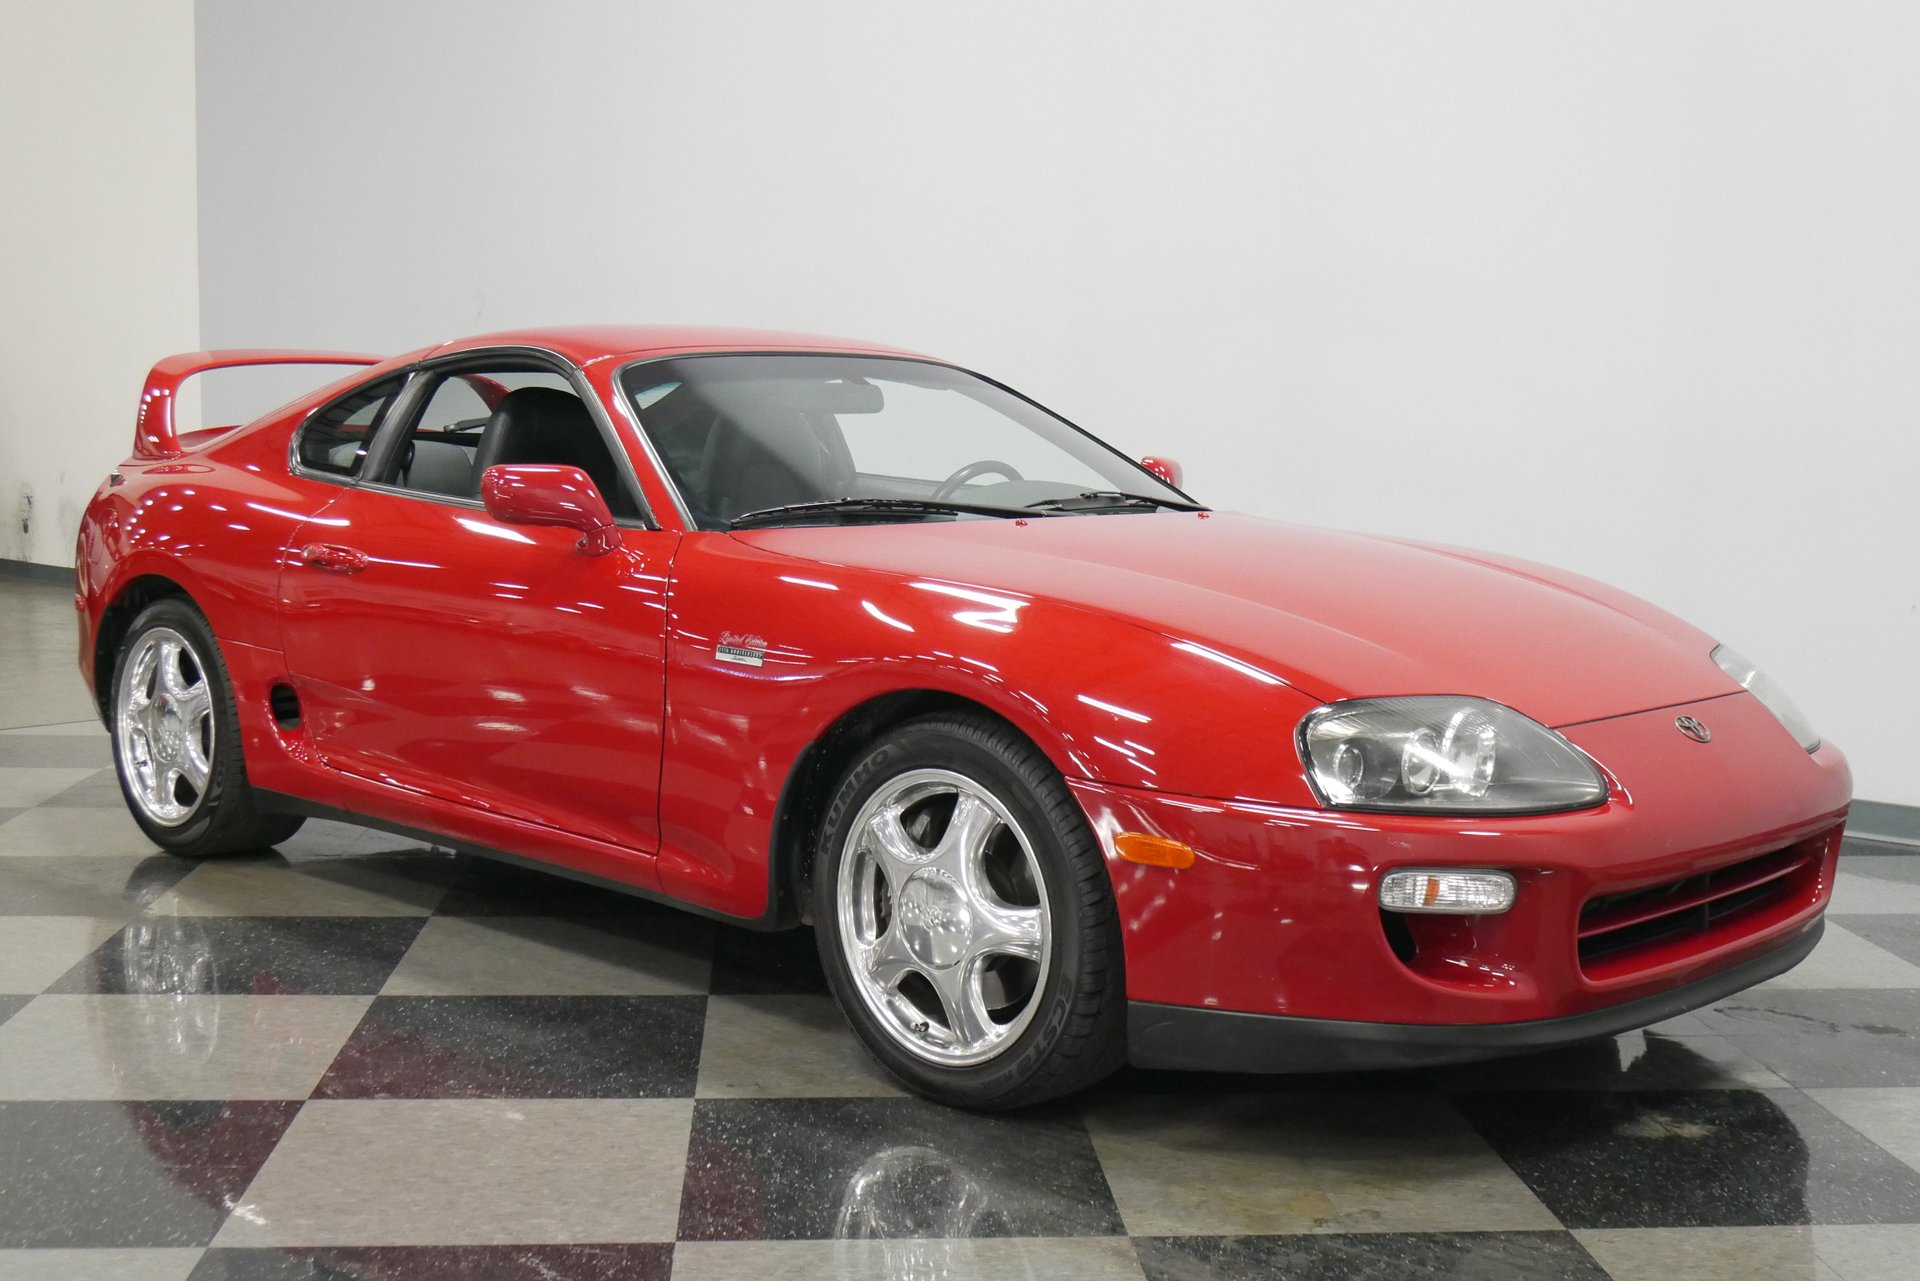 One-Owner 1997 Toyota Supra Mark IV “Time Capsule” Listed for Sale at  $92,995 - autoevolution